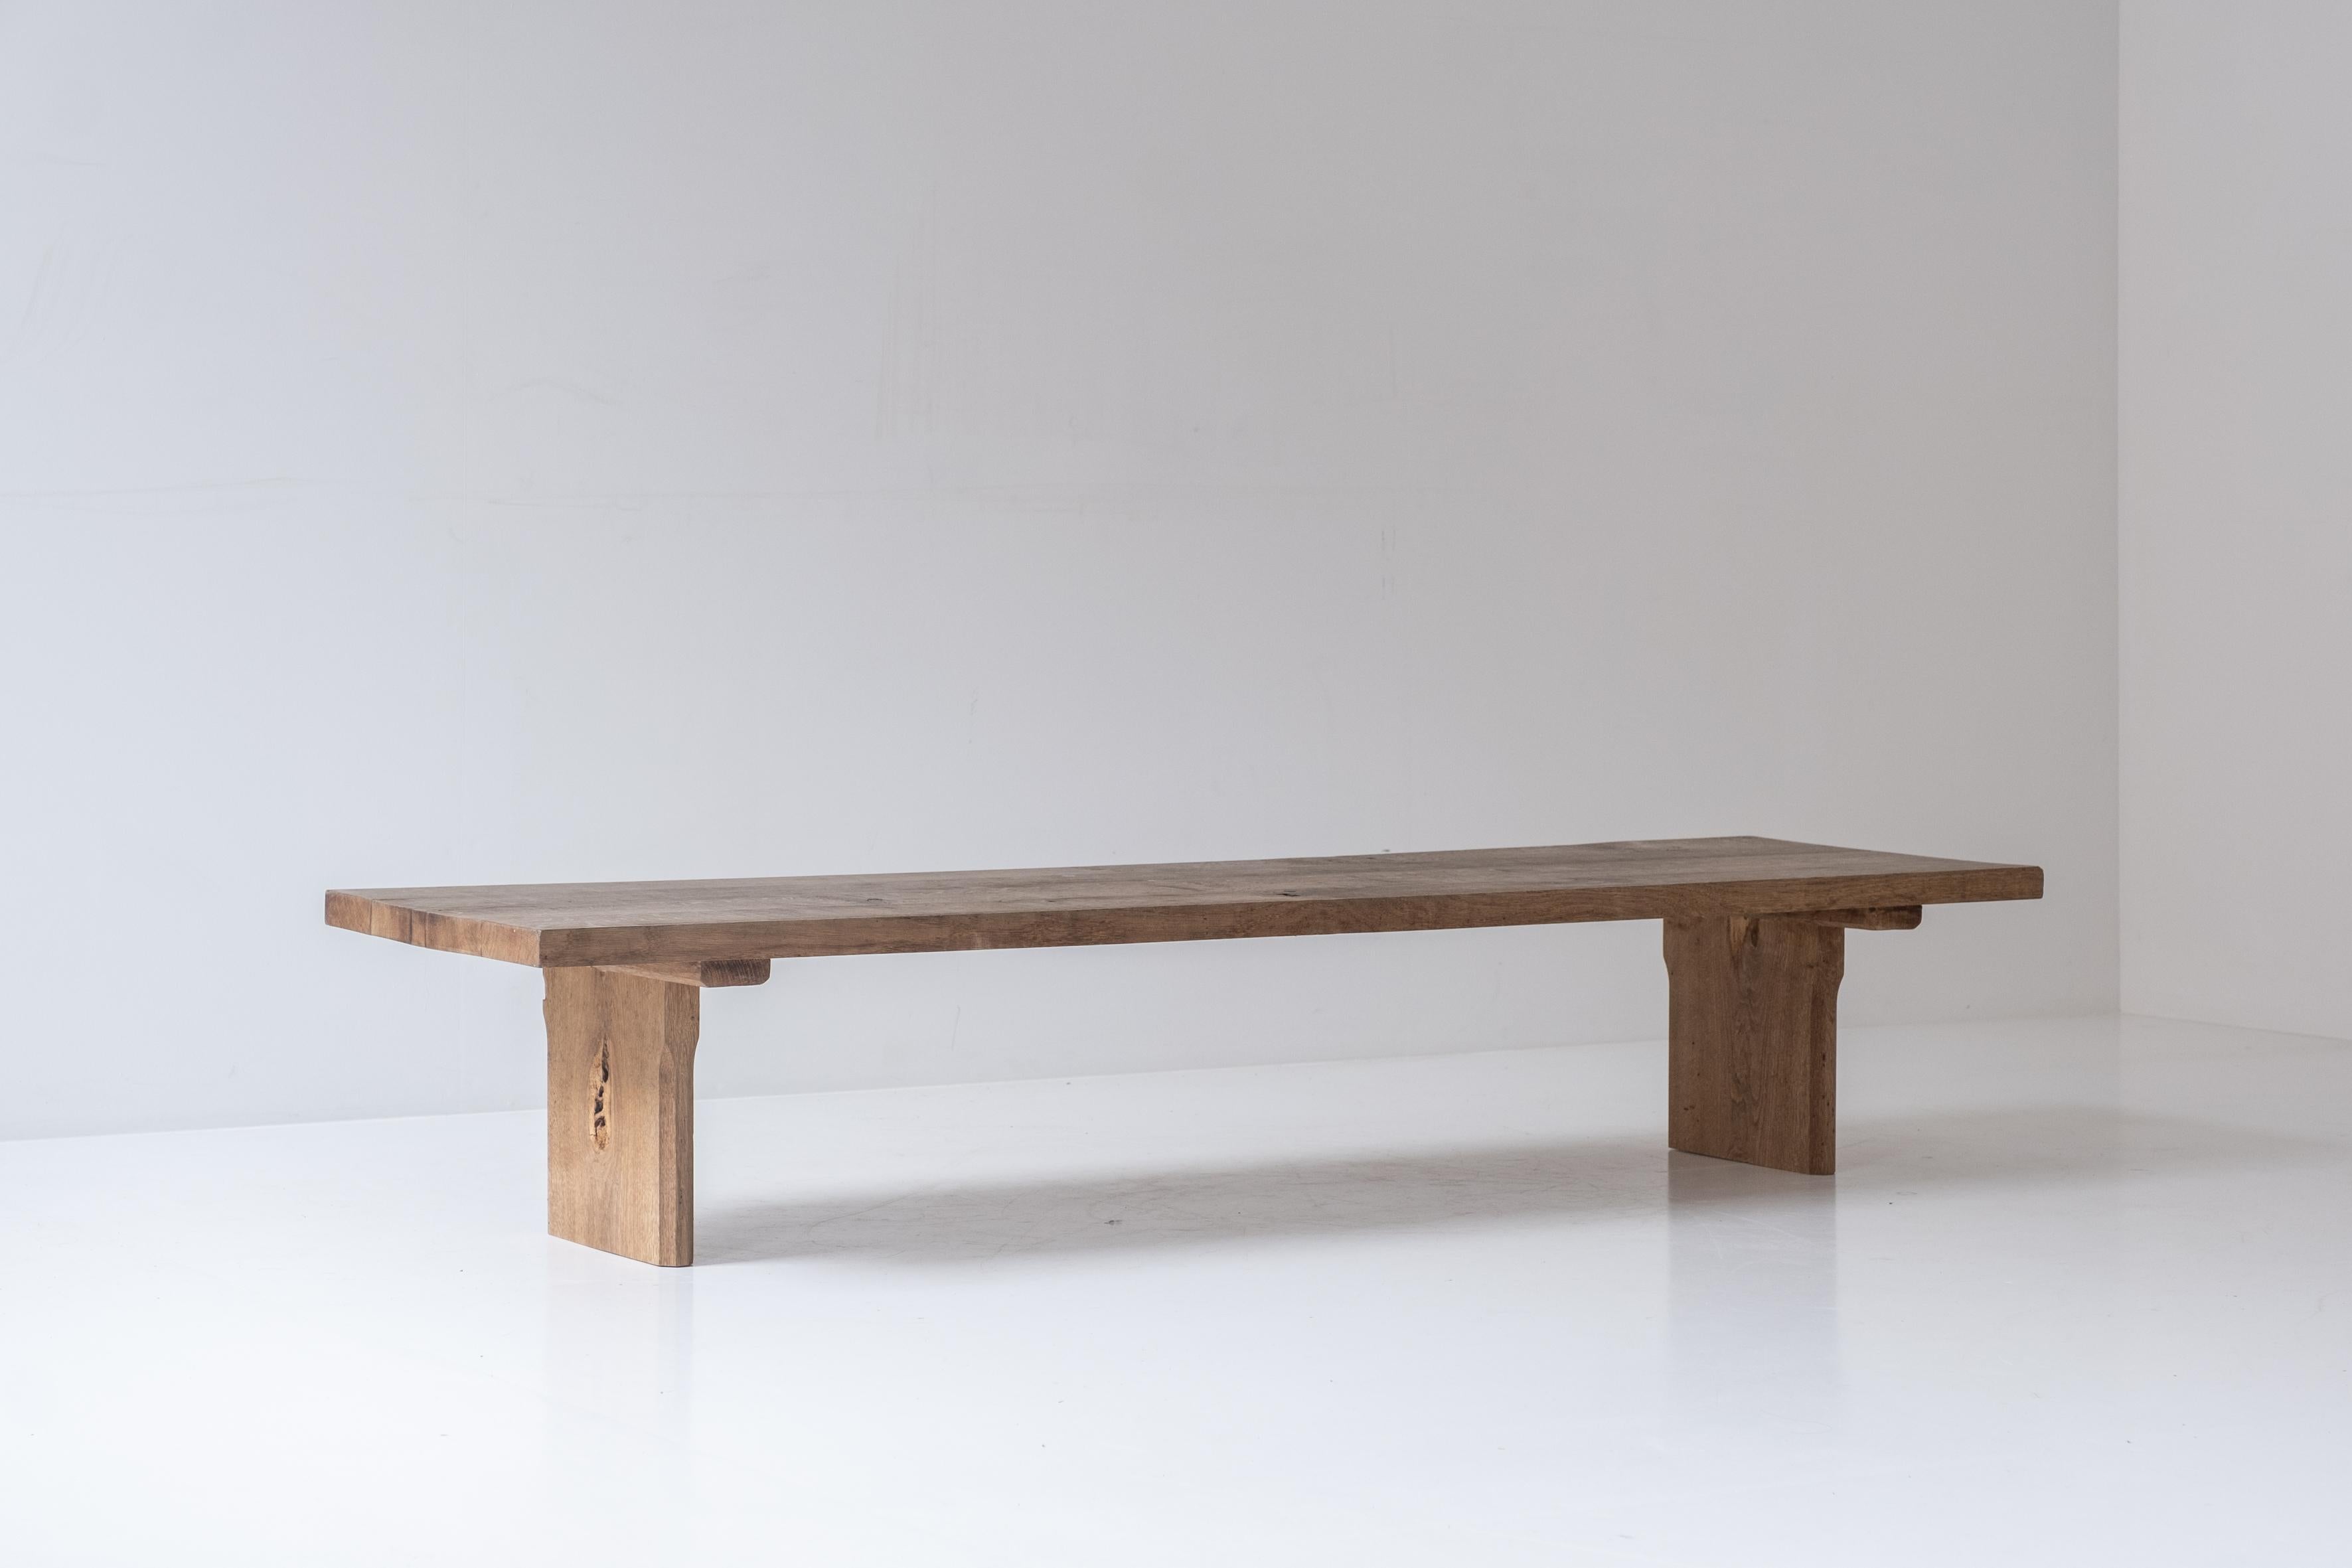 Arts and Crafts Low rustic coffee table from France, designed and handmade in the 1950s.